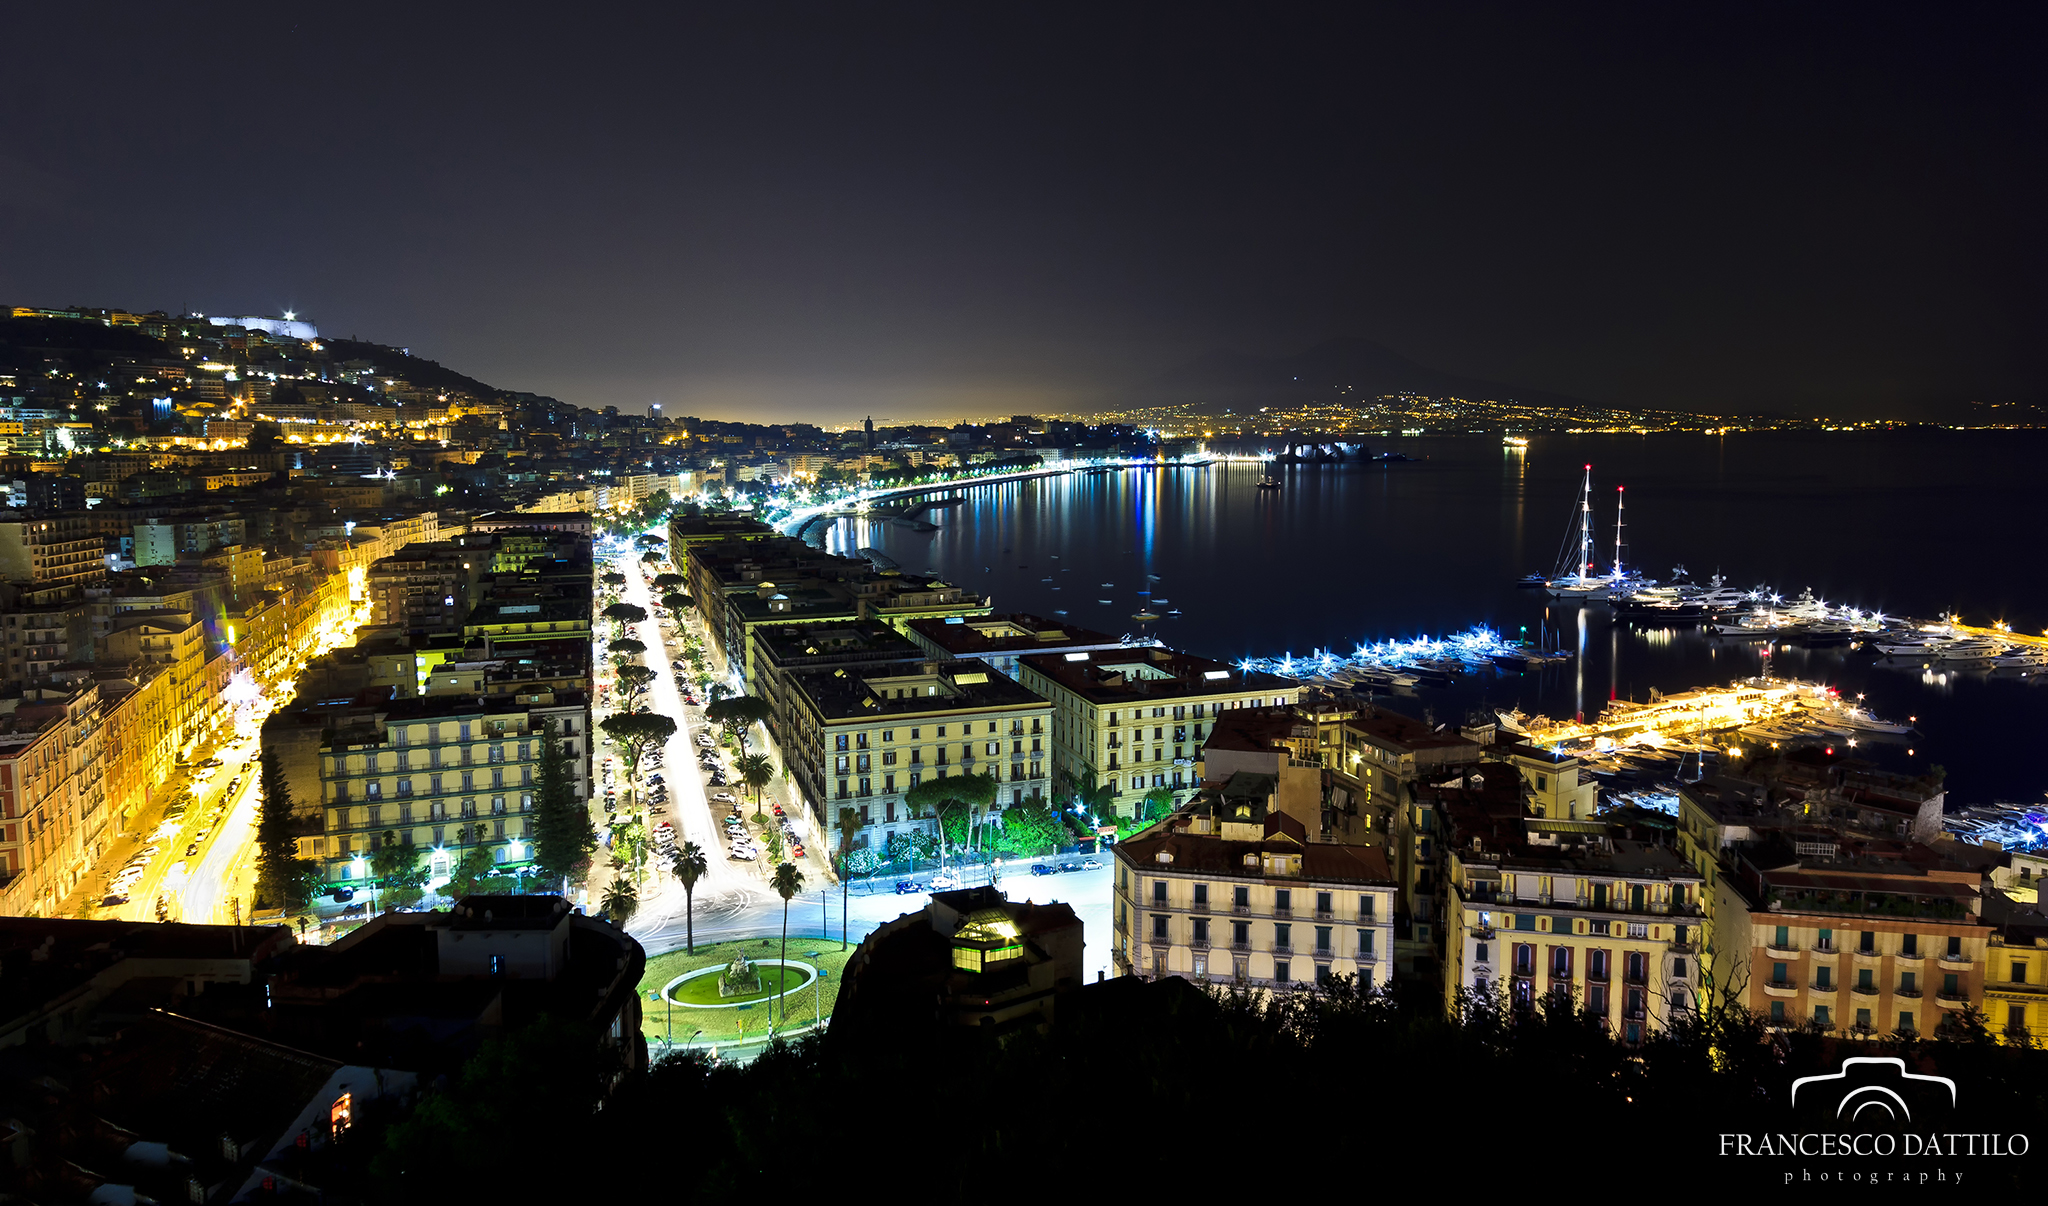 Naples in the night ......